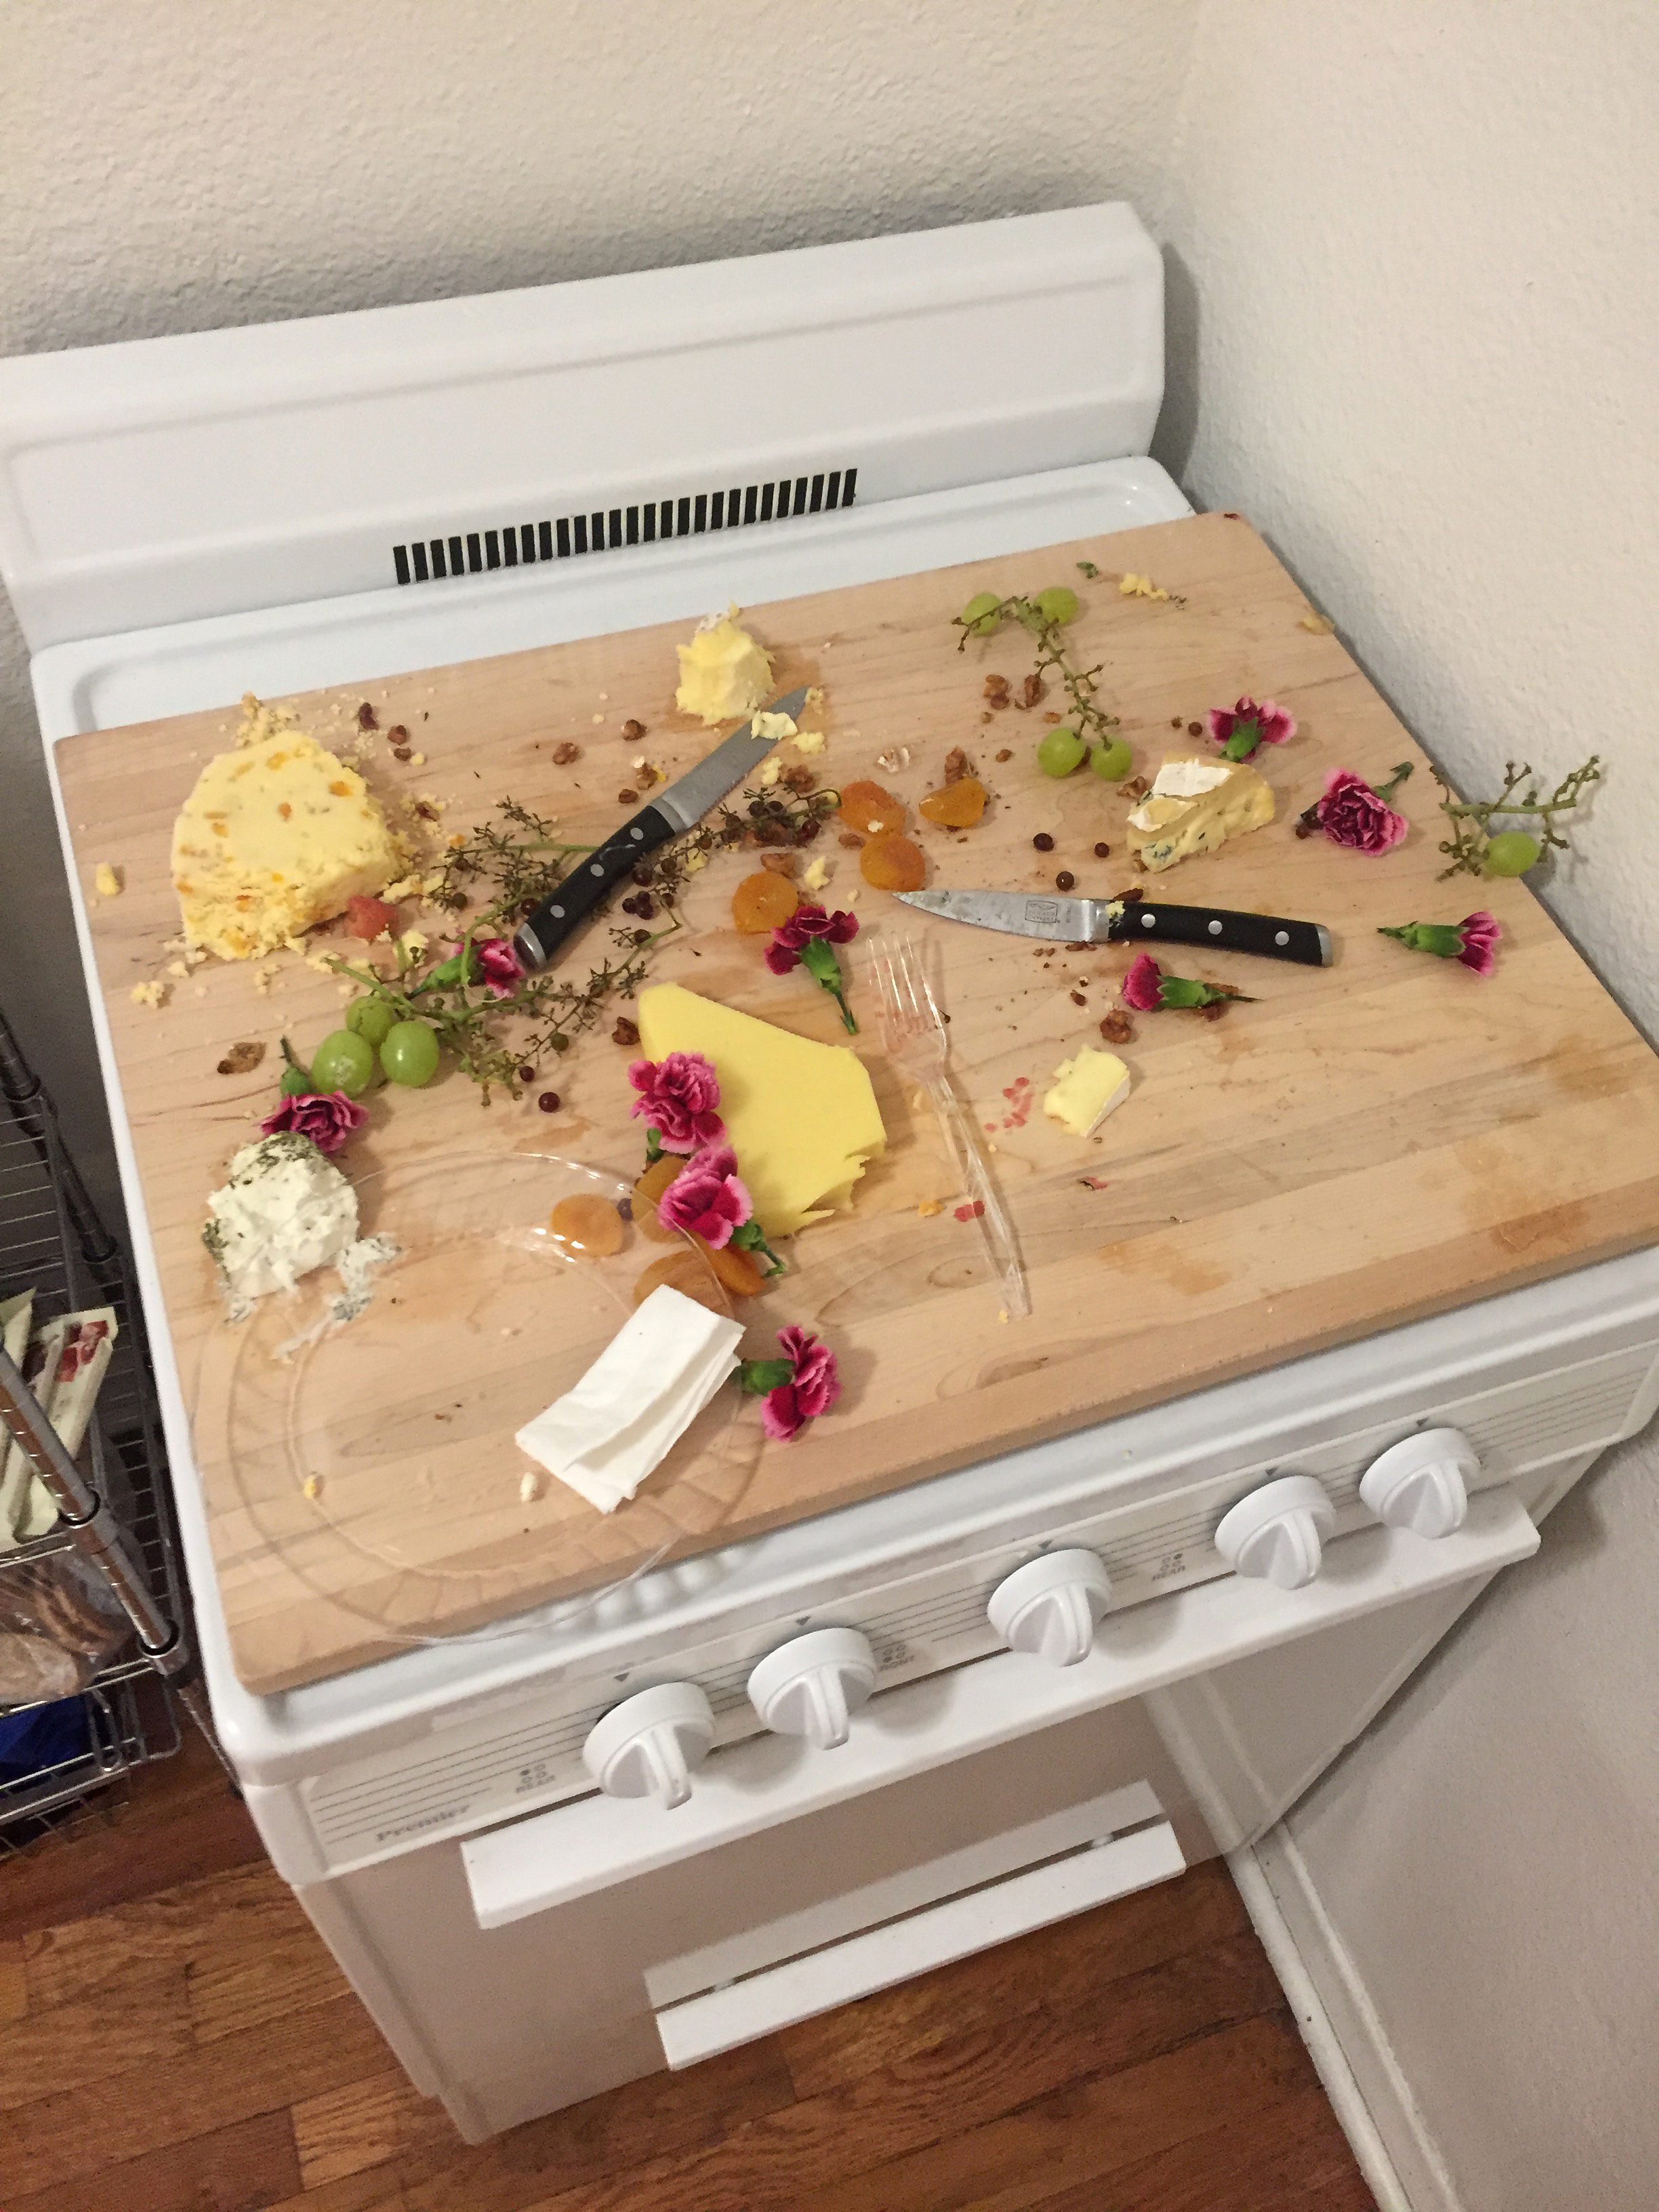 A wooden cheese board littered with food scraps, plates and flowers in a kitchen